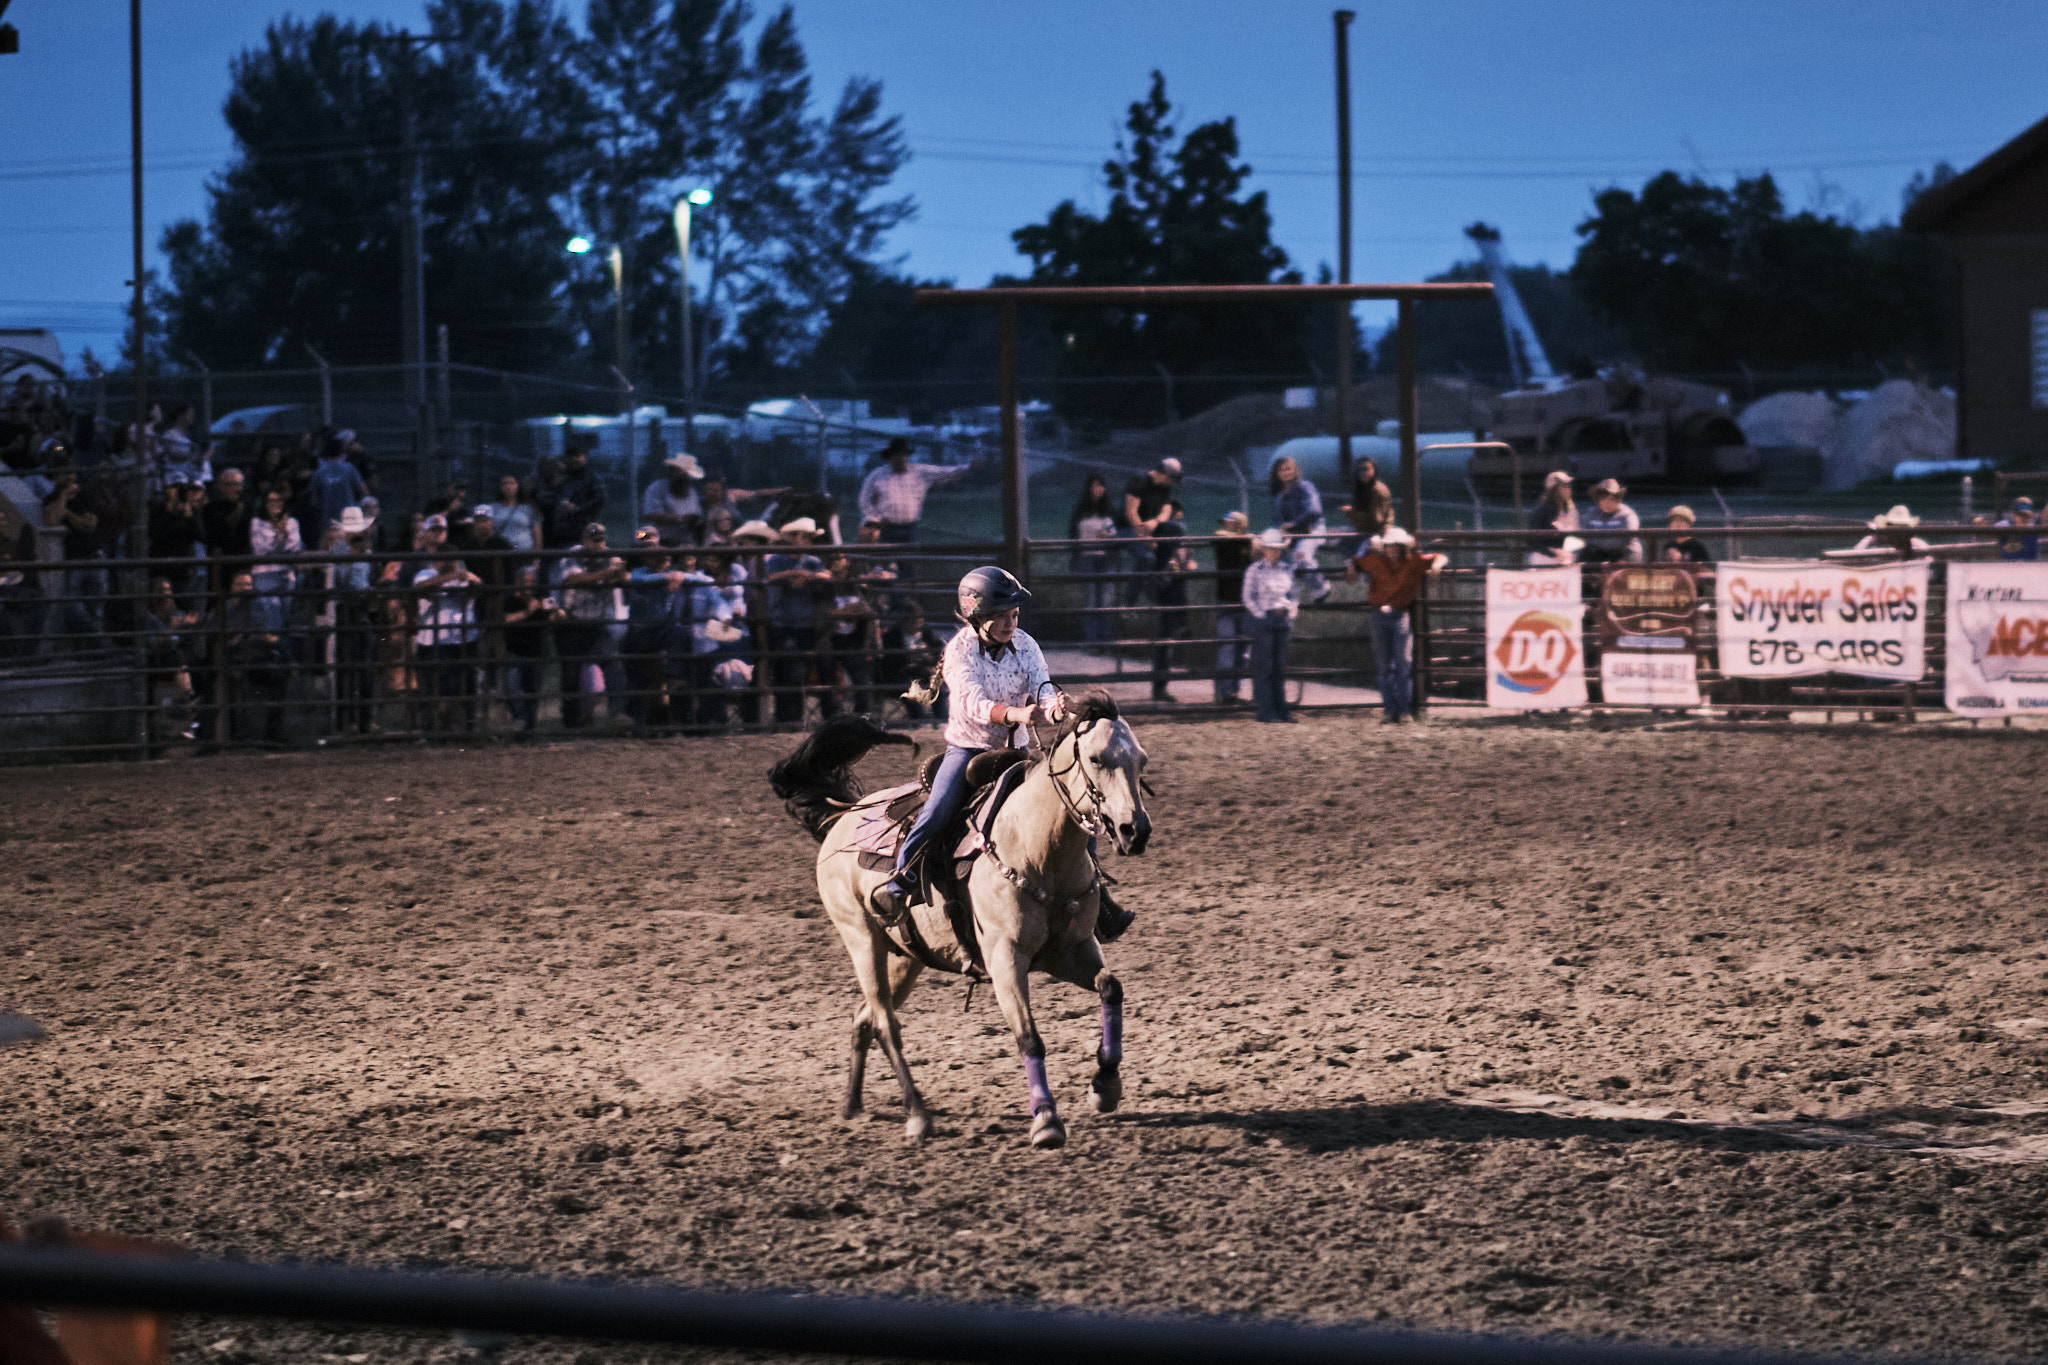 A cowgirl on her horse sprinting to the finish line during a barrel race